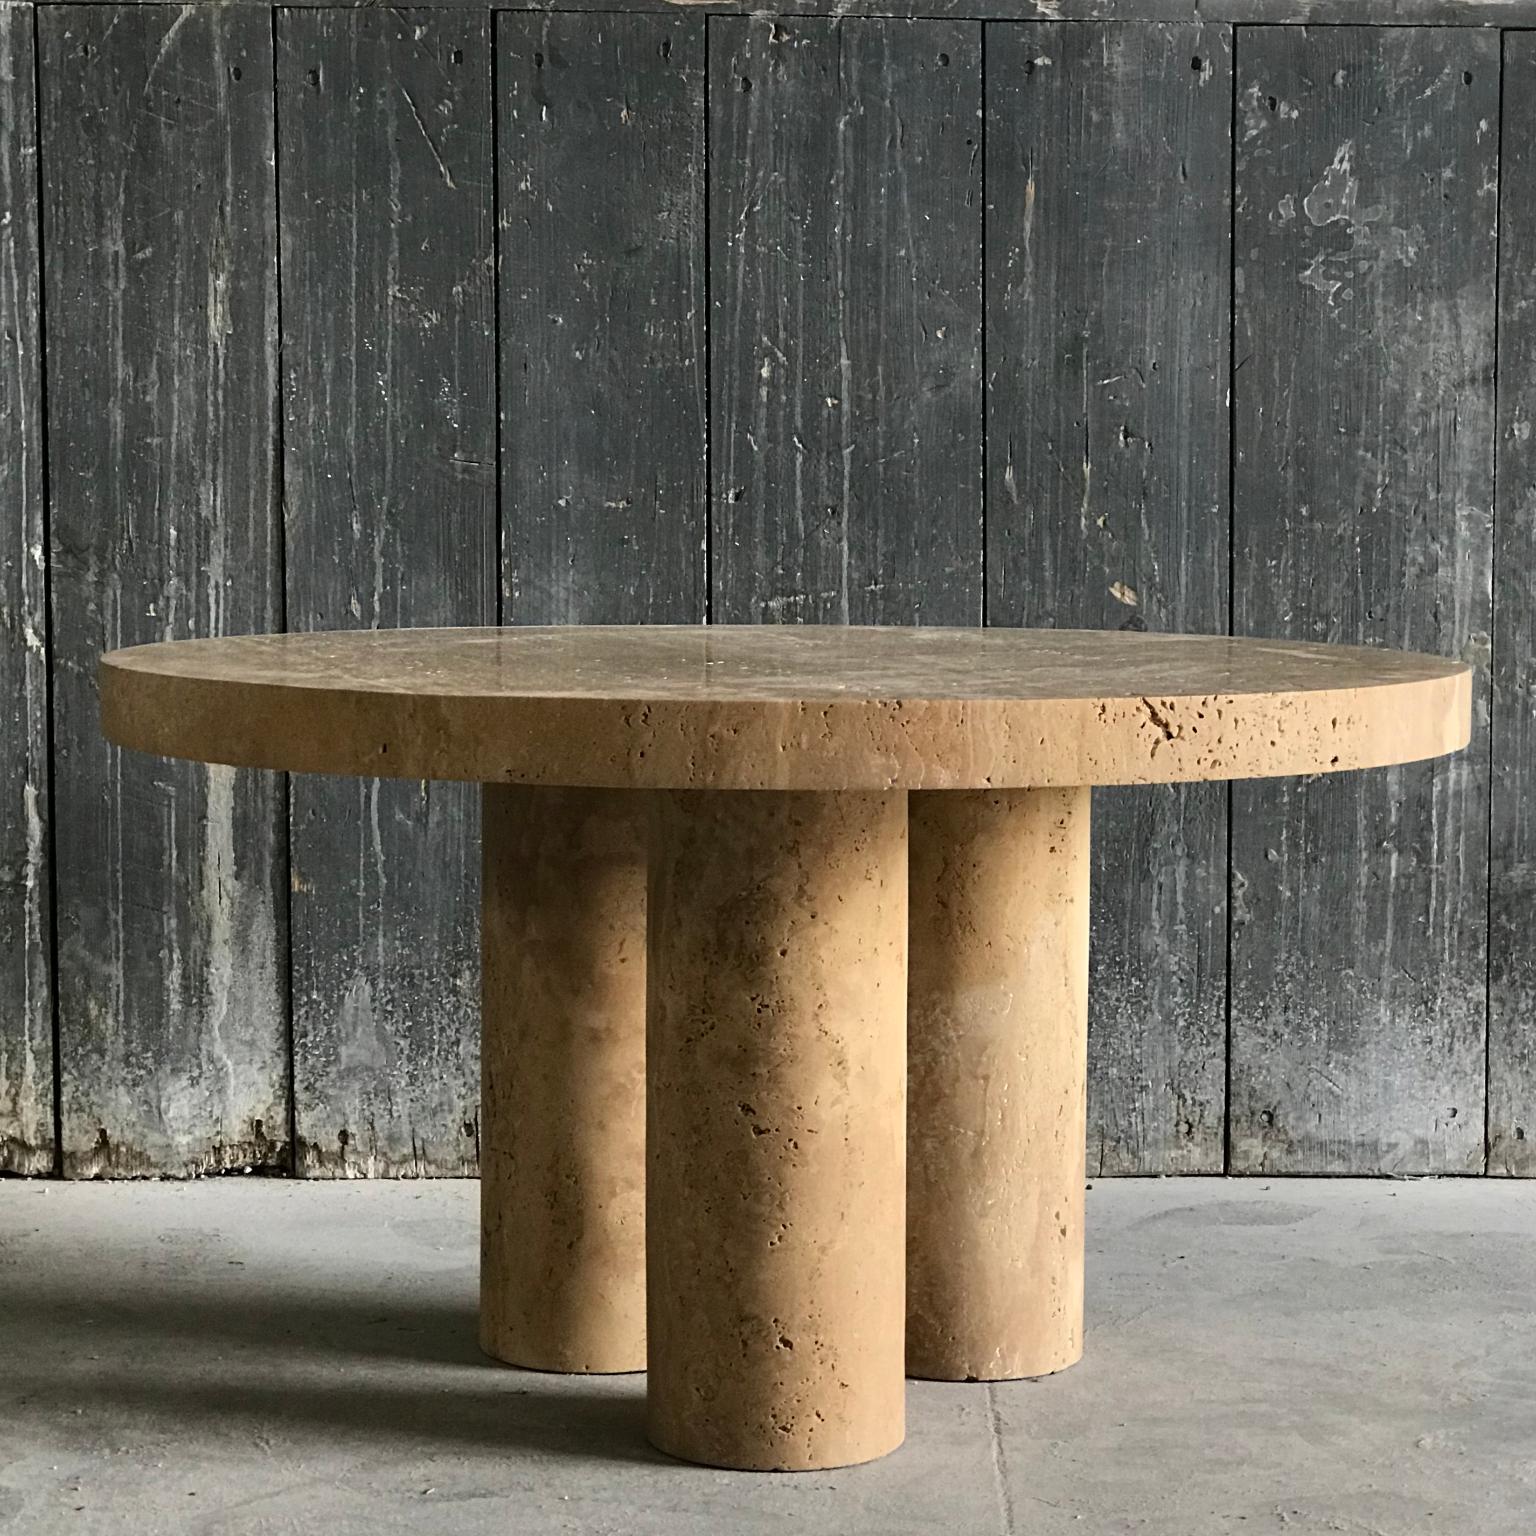 Sculptural cuddle coffee table 54 by Pietro Franceschini
Dimensions: D 54 x H 36 cm
Materials: Travertine.

Pietro Franceschini is an architect and designer based in New York and Florence. He was educated in Italy, Portugal and United States.